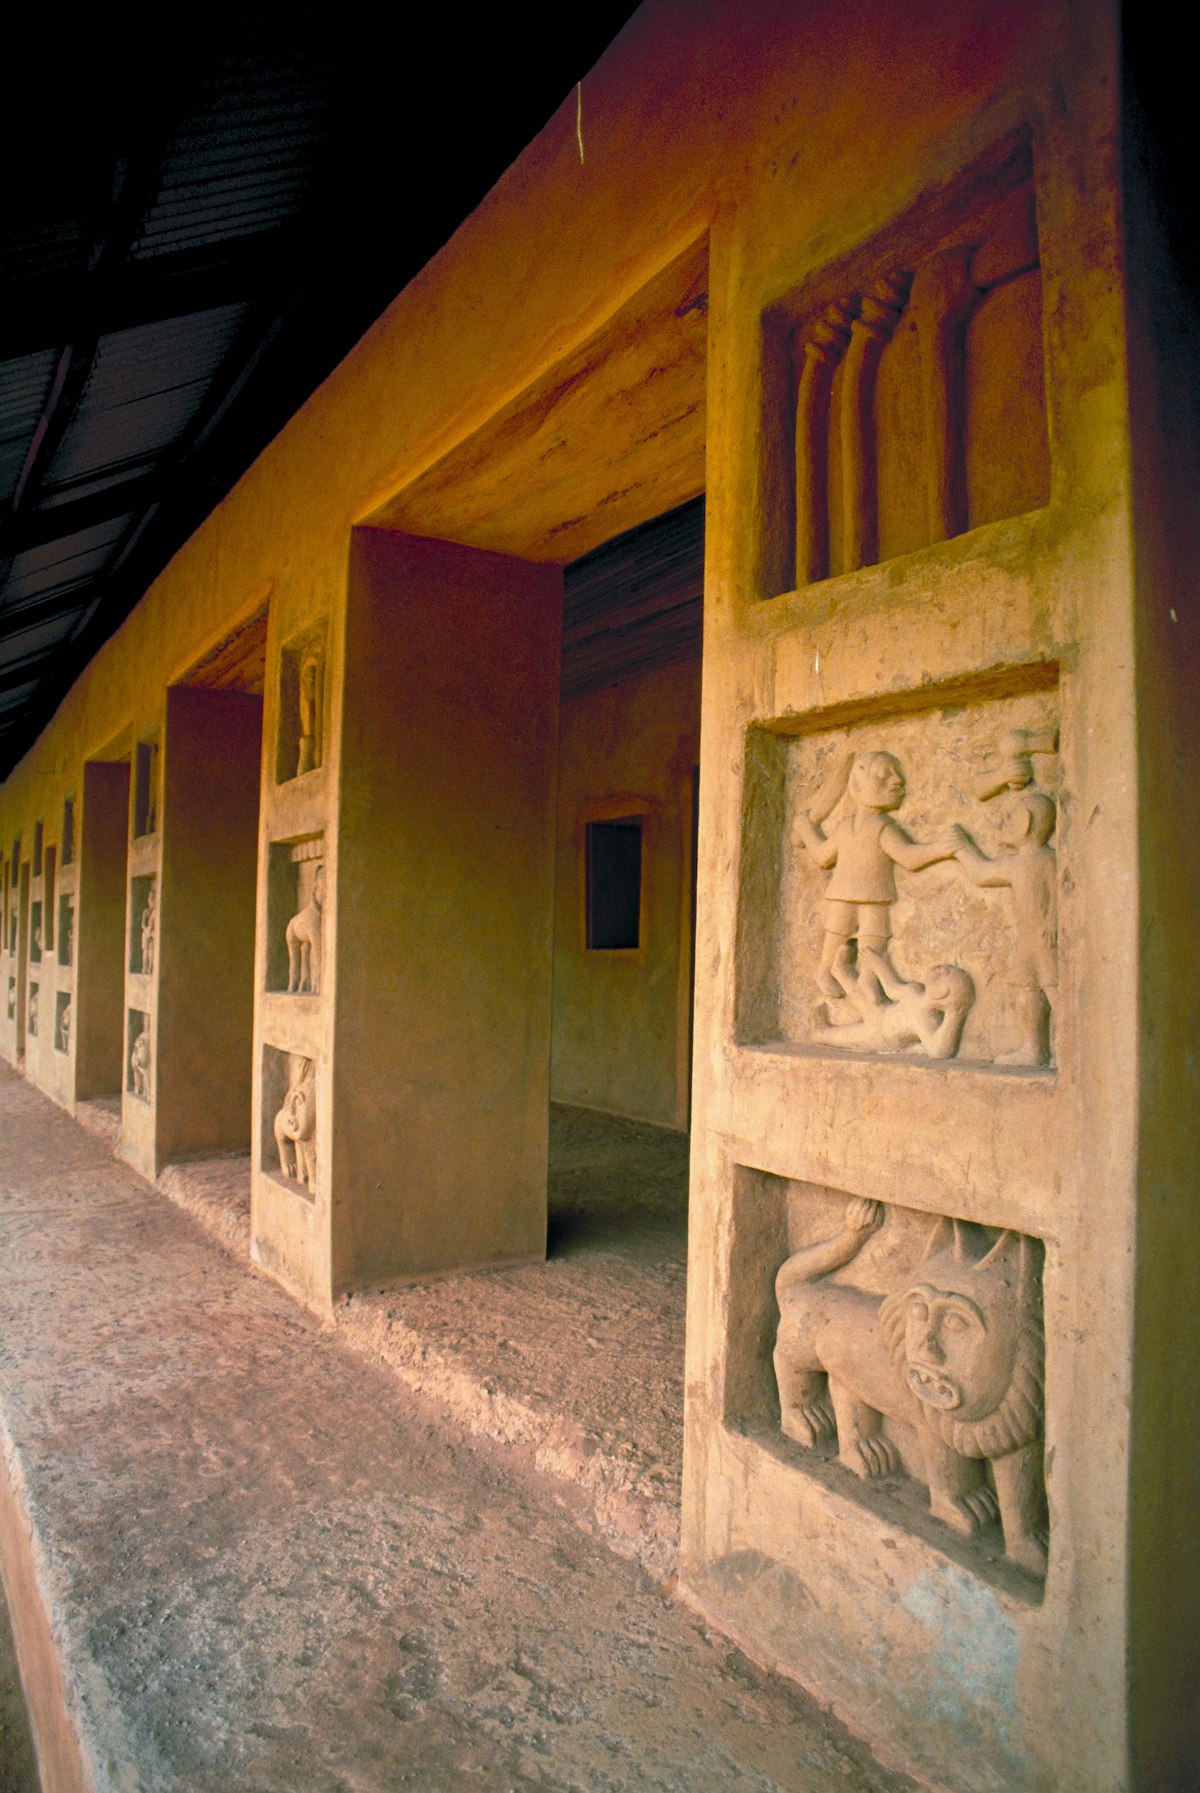 The Royal Palace Museum of the Fon dynasty kings of the Dahomey Empire. The Museum is a UNESCO World Heritage Site. Abomey, Benin. West Africa. (Photo by: Education Images/UIG via Getty Images)